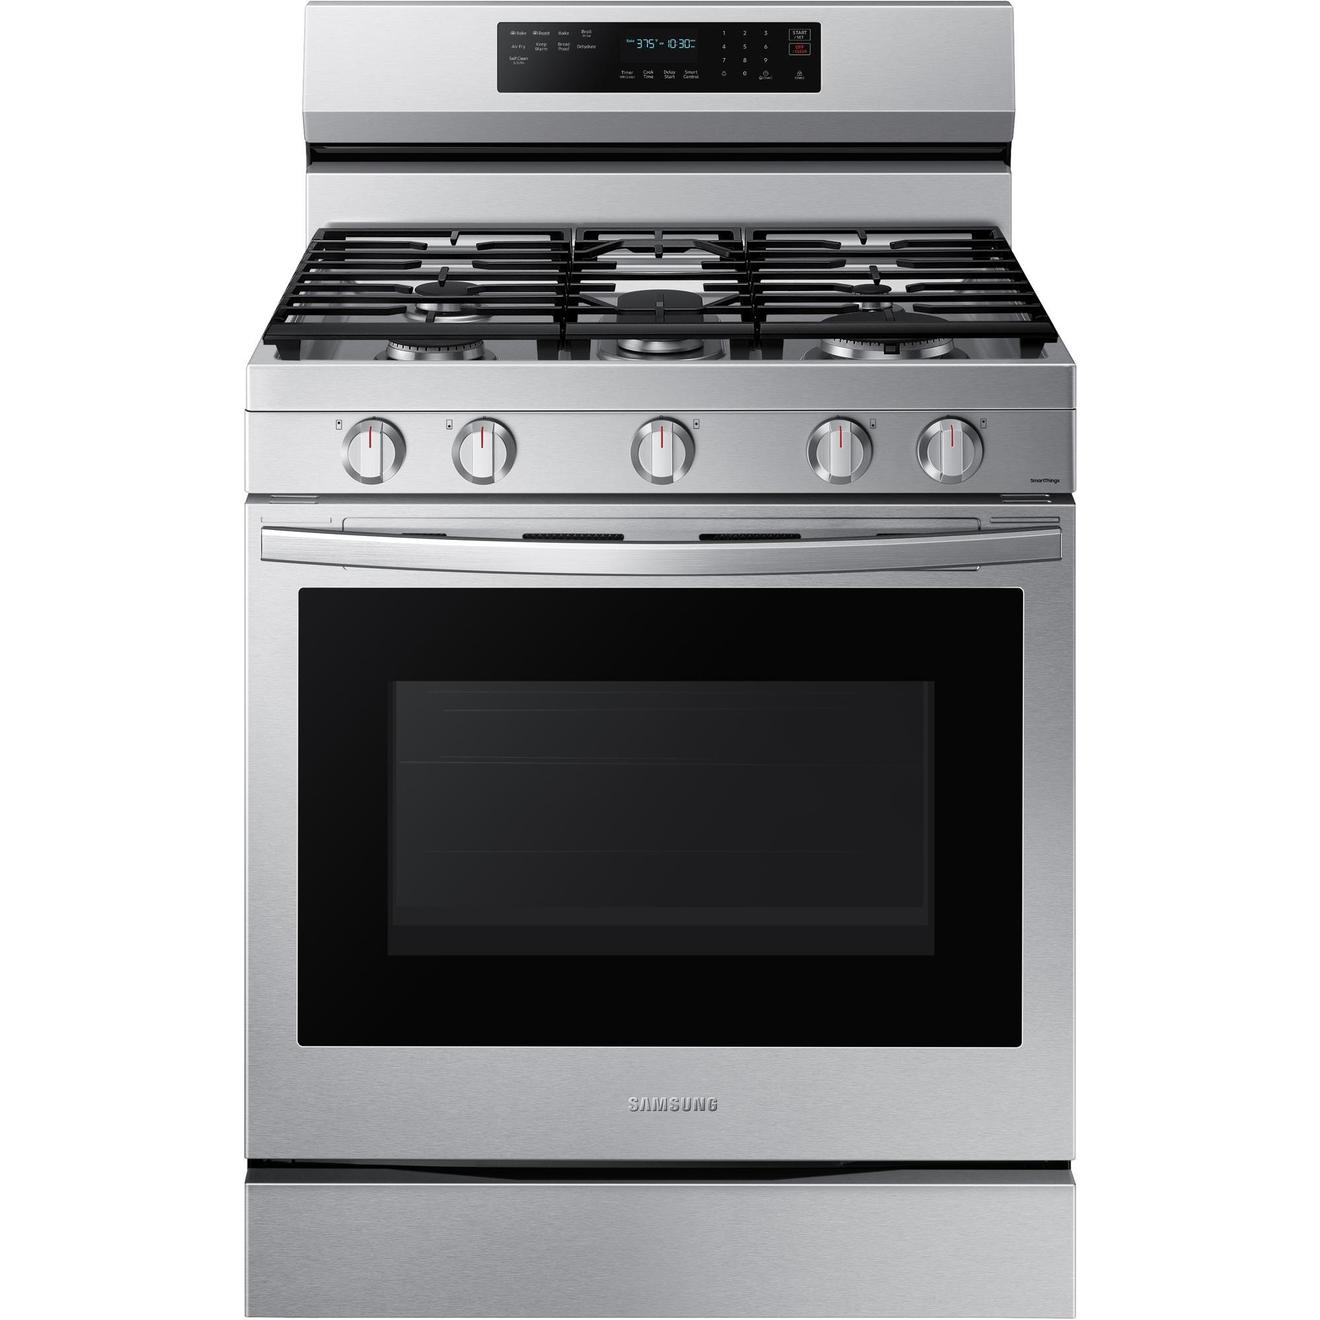 Samsung 30 inch Single Oven Gas Range offers at $1199.98 in Trail Appliances